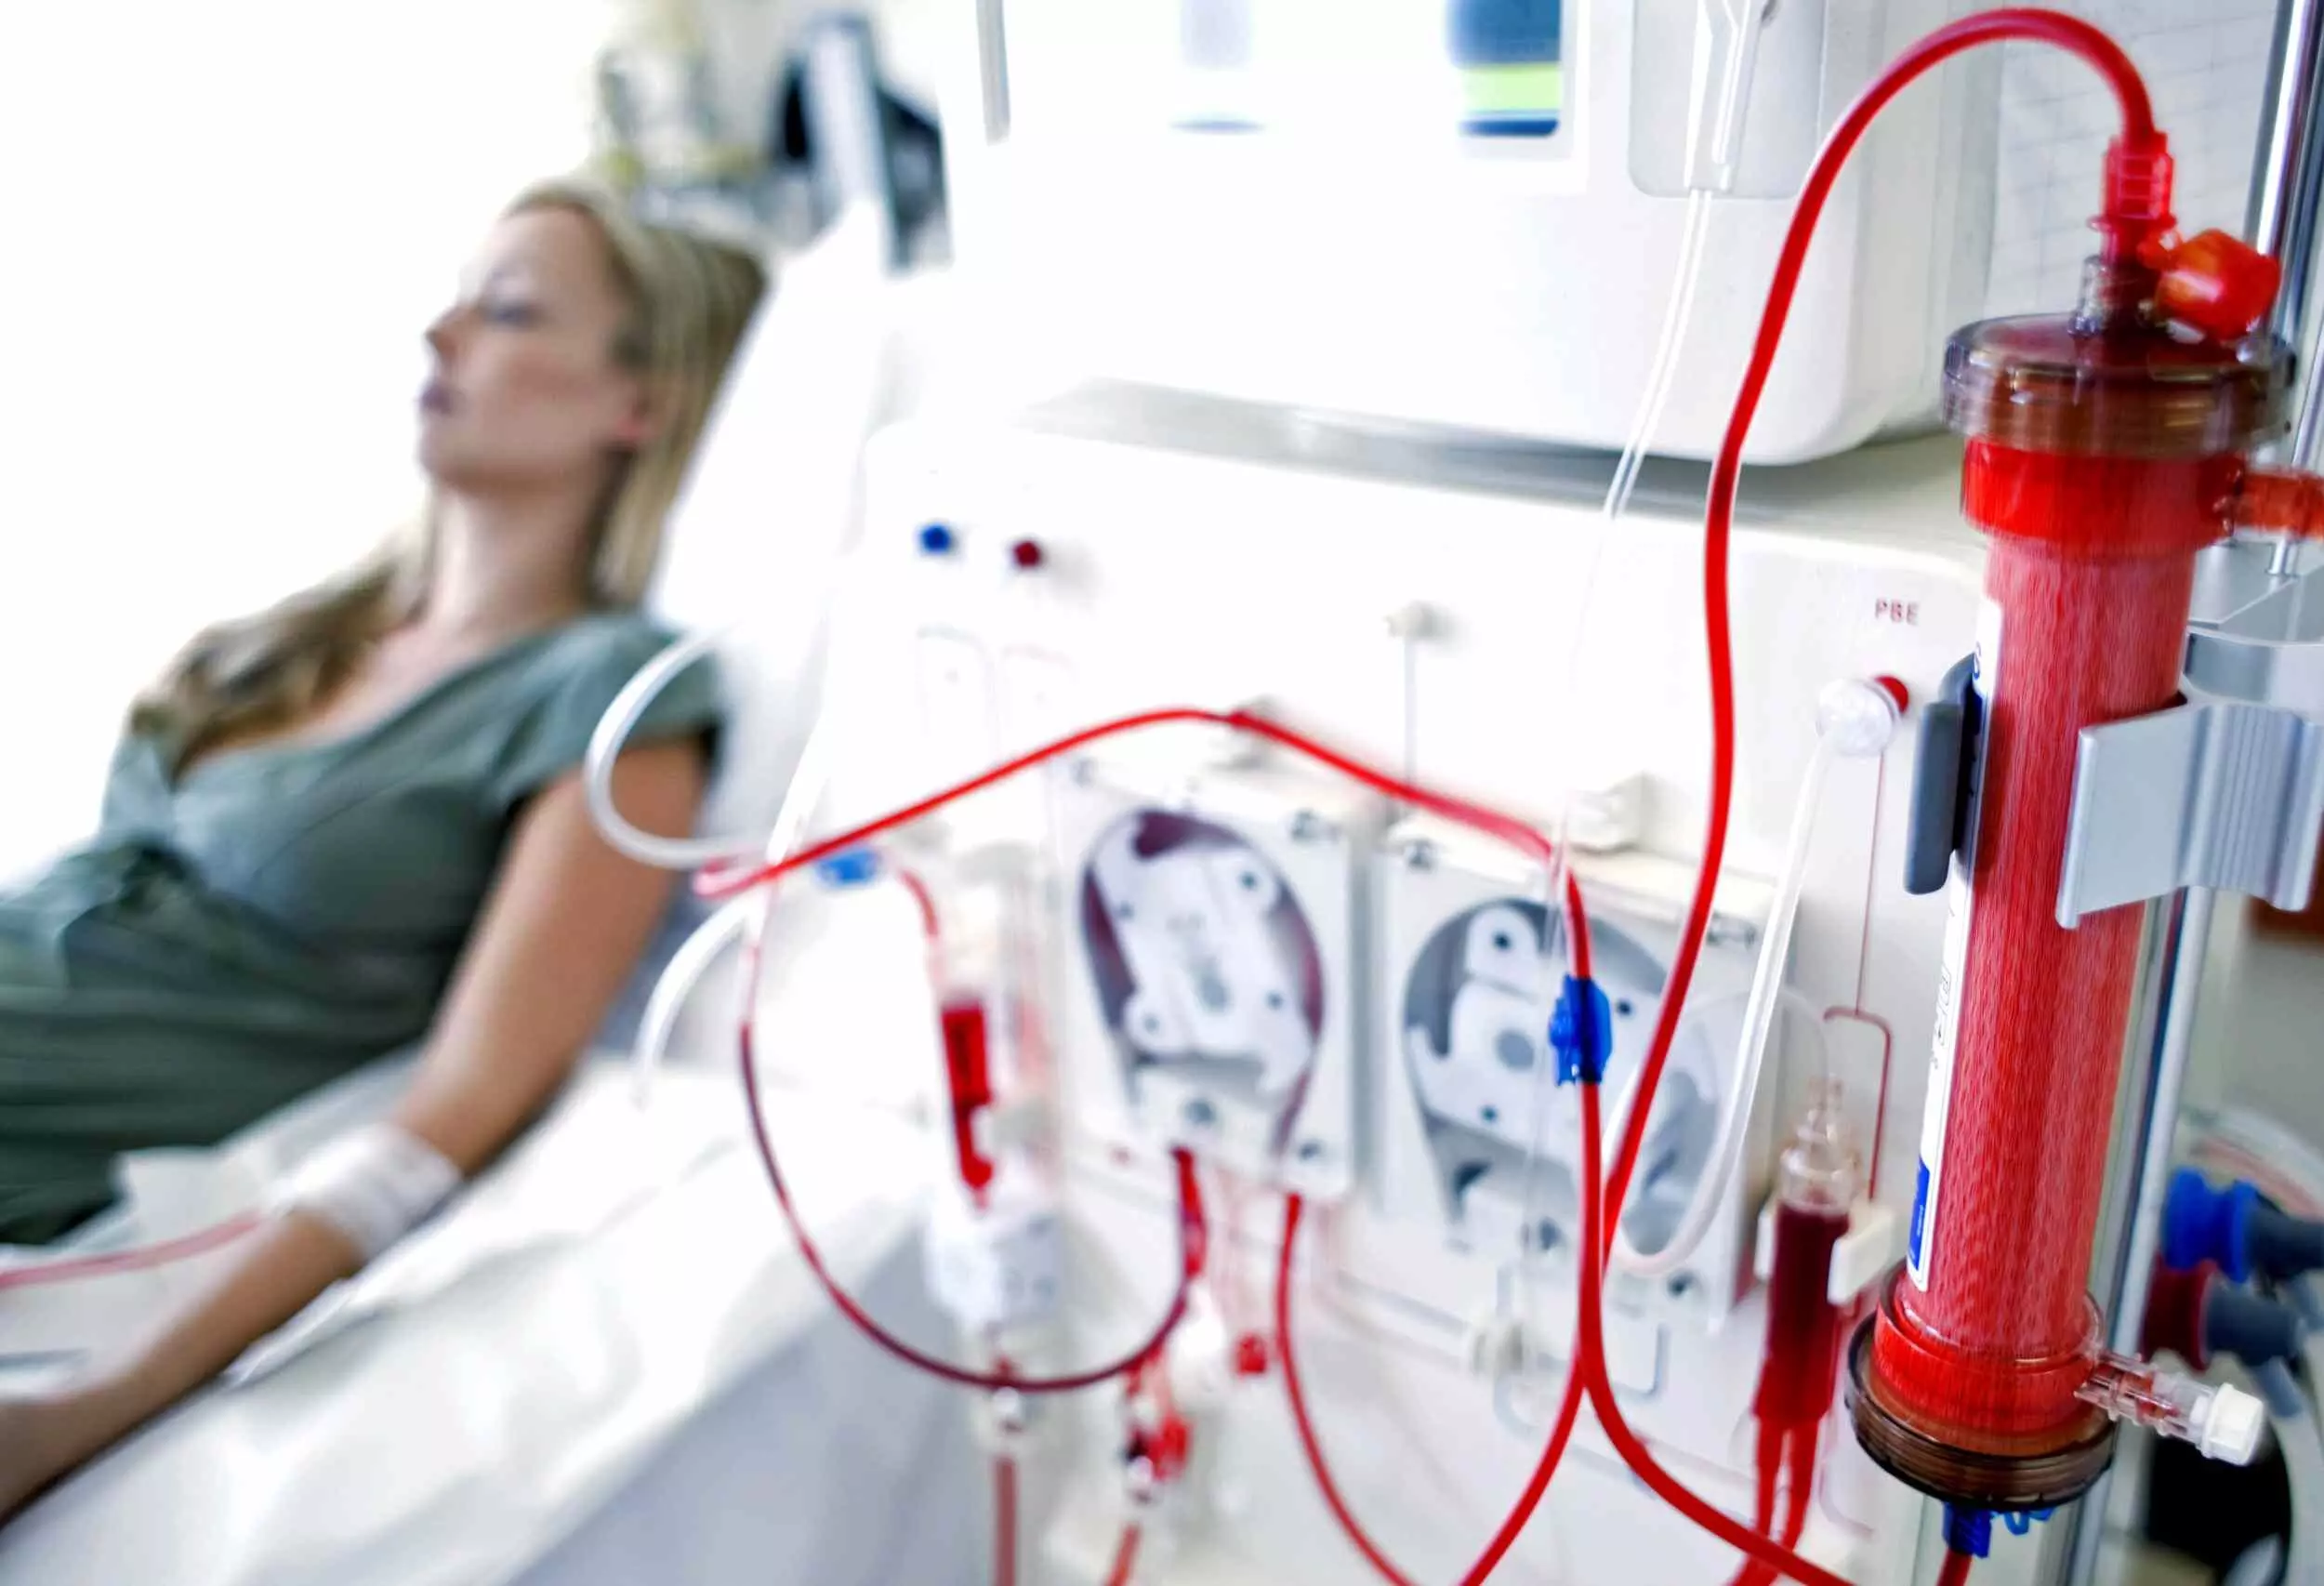 Daprodustat an effective alternative treatment for anemia in incident dialysis patients: JAMA